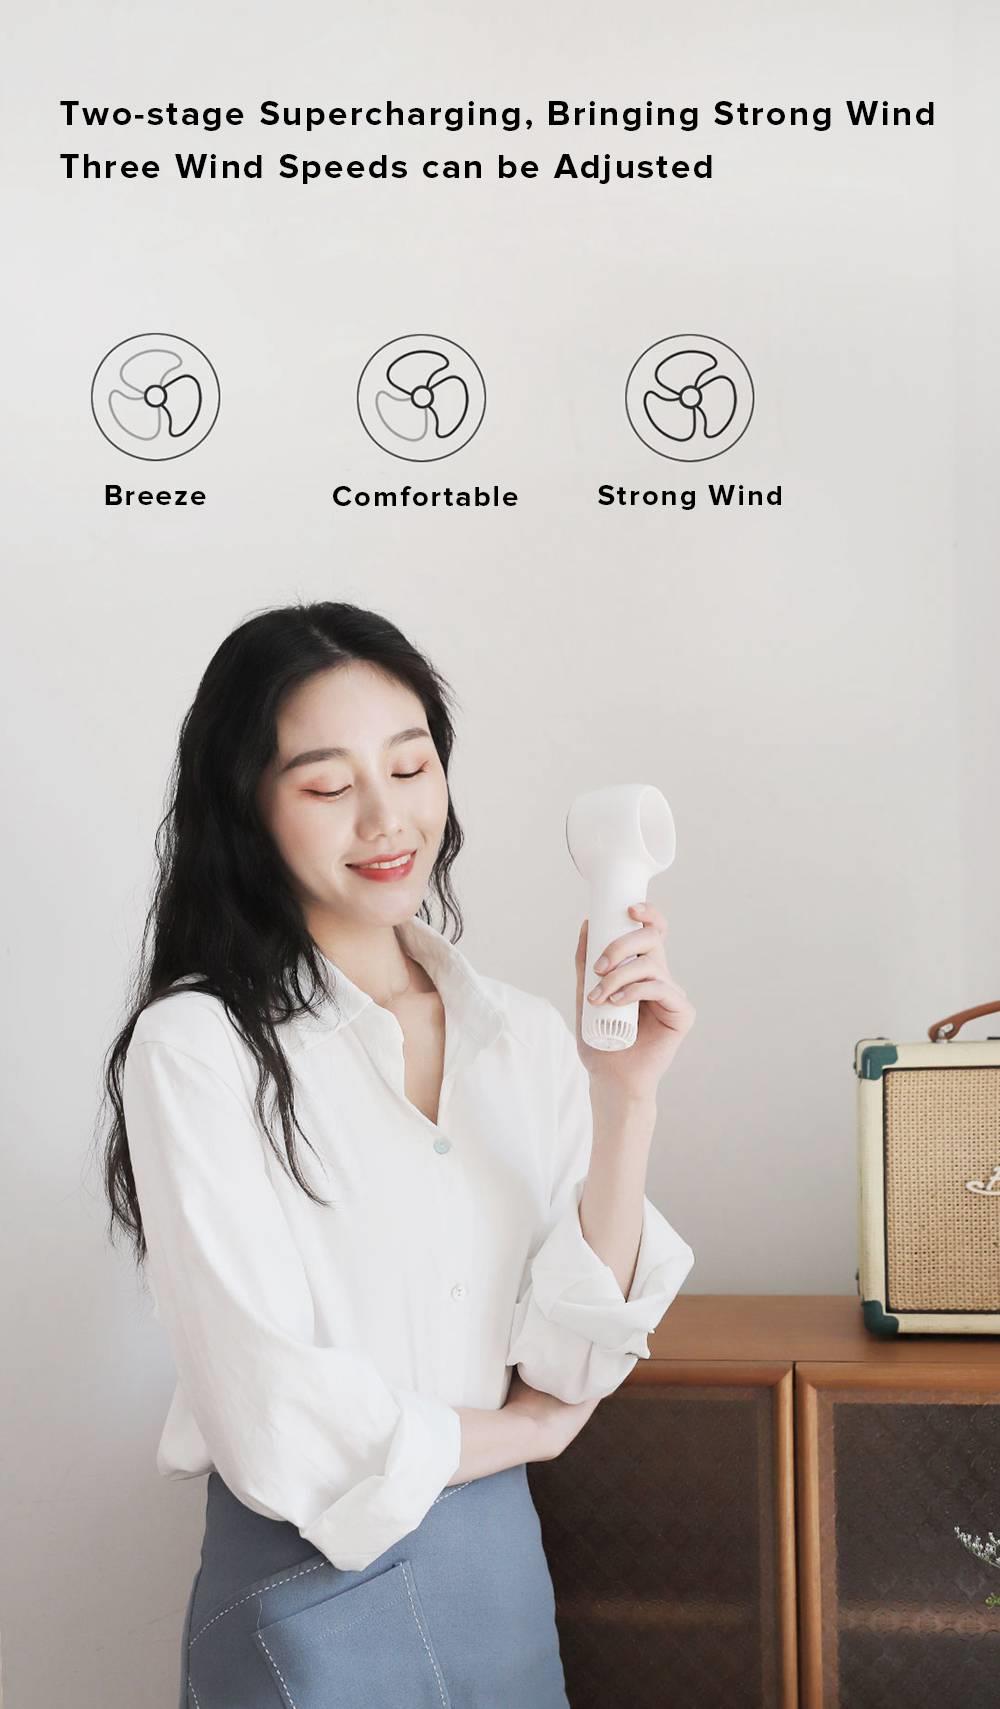 Weiyuan Smart Handheld Leafless Fan Noise Reduction Cooling Three Wind Speeds Two-stage Pressurized Air Supply 2000 mAh Battery USB Charging From Xiaomi Youpin - Beige Gray